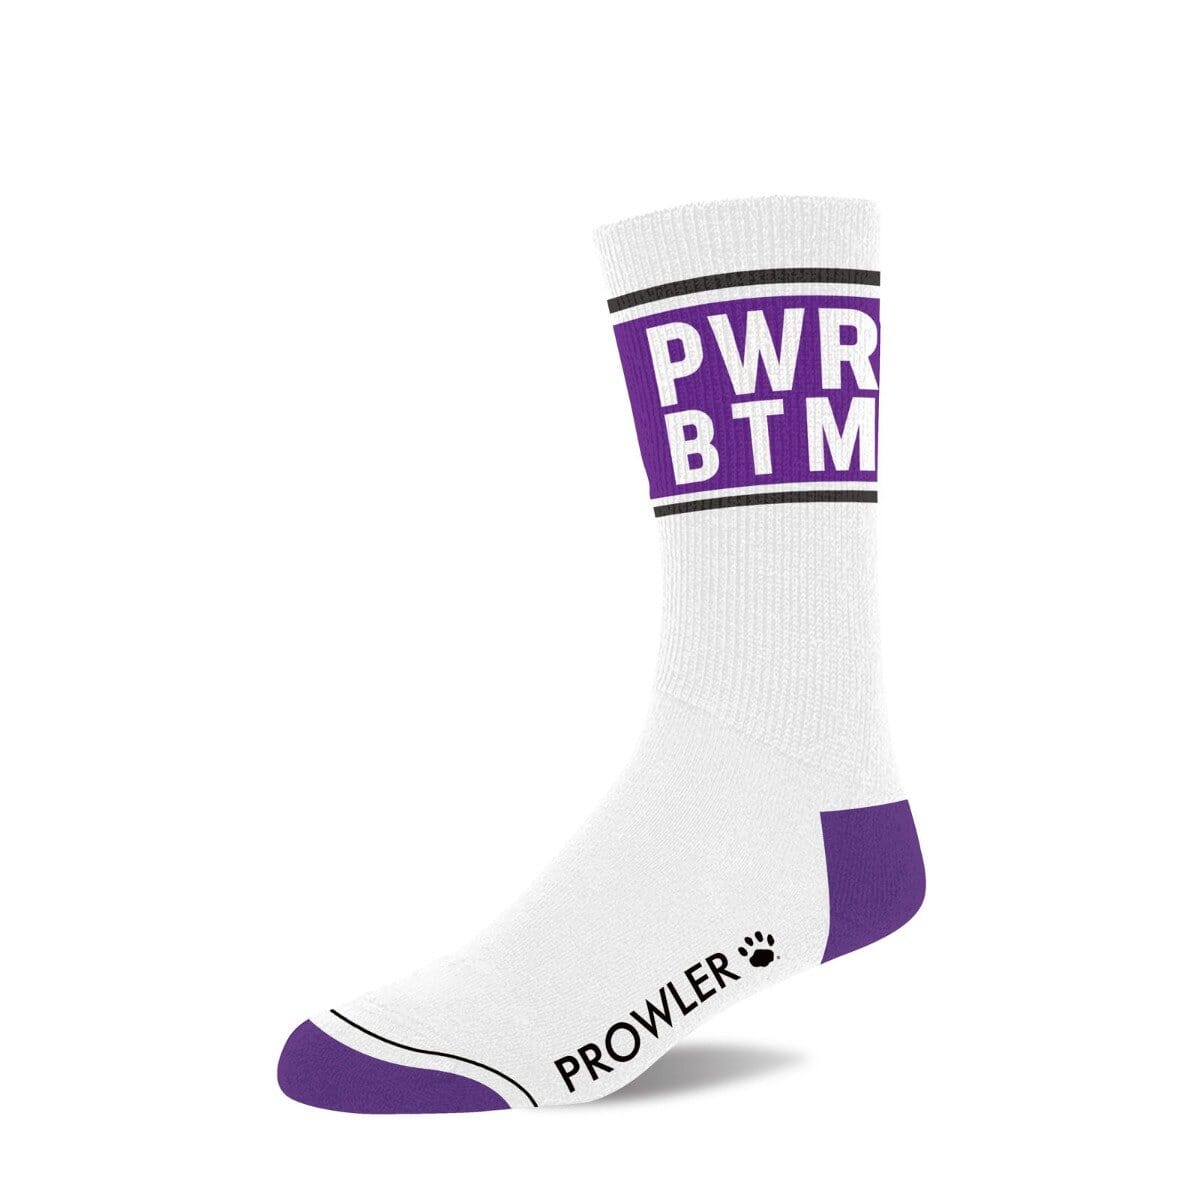 a purple and white socks with the words pwr btm on it